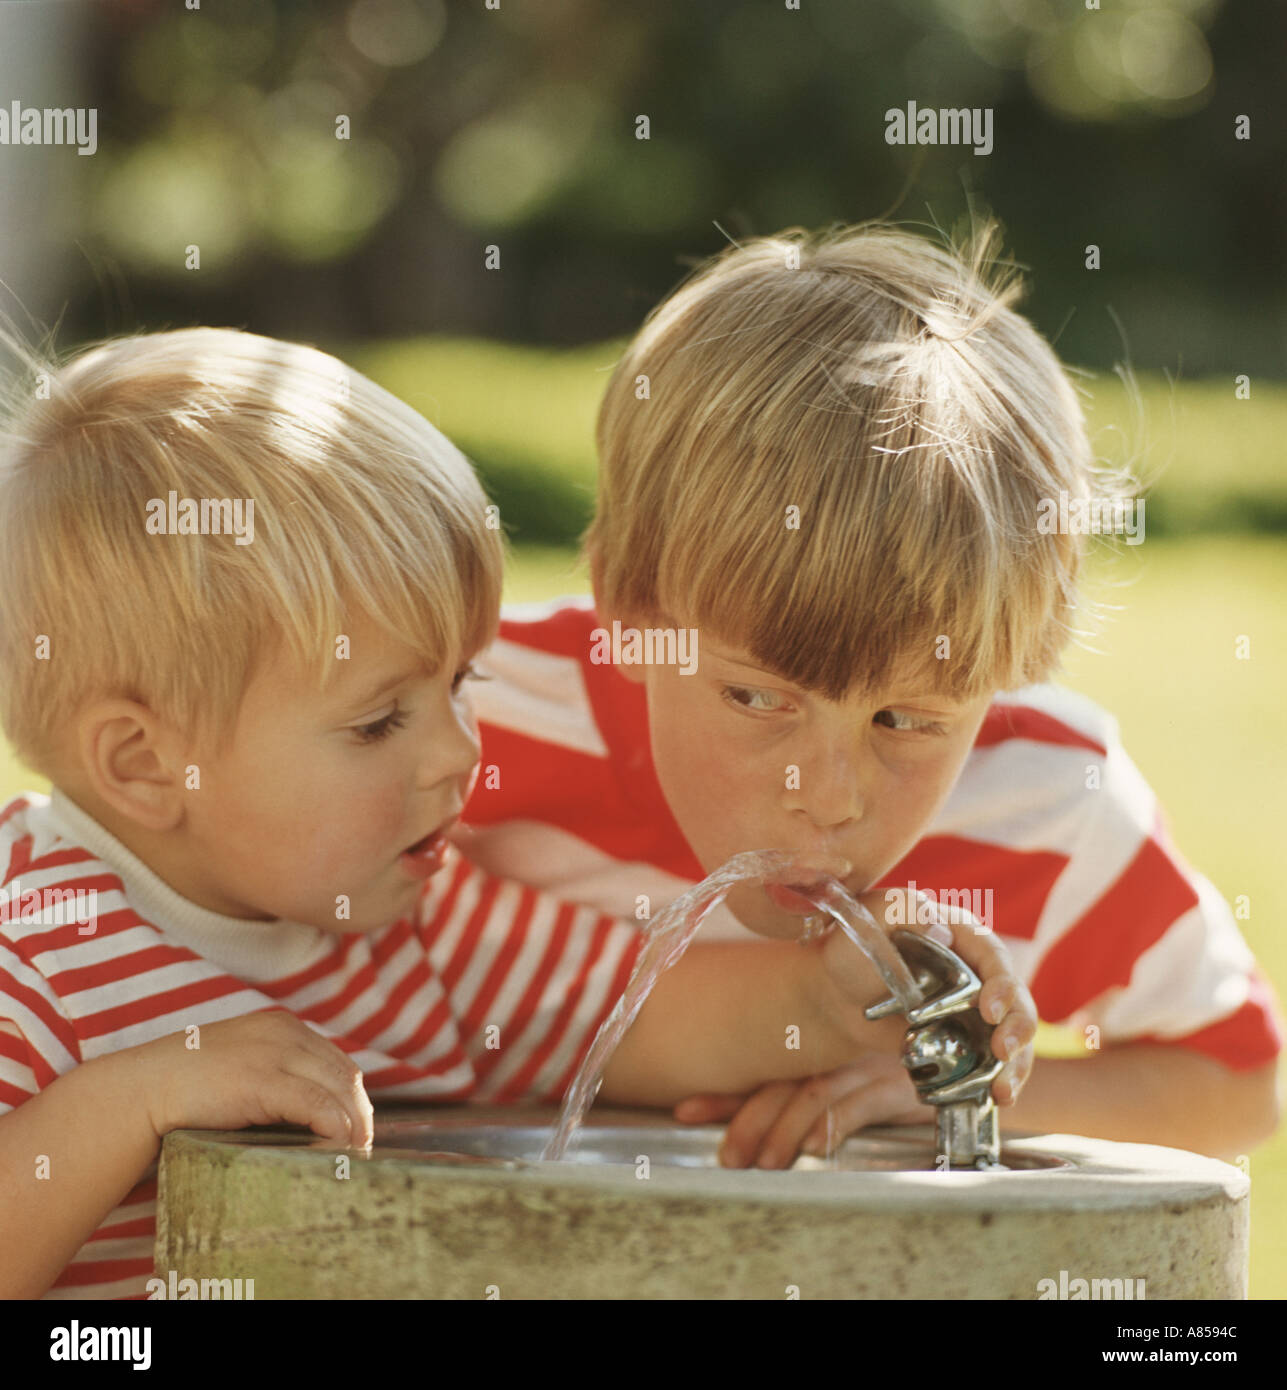 https://c8.alamy.com/comp/A8594C/two-young-boys-drinking-from-outdoor-water-fountain-A8594C.jpg